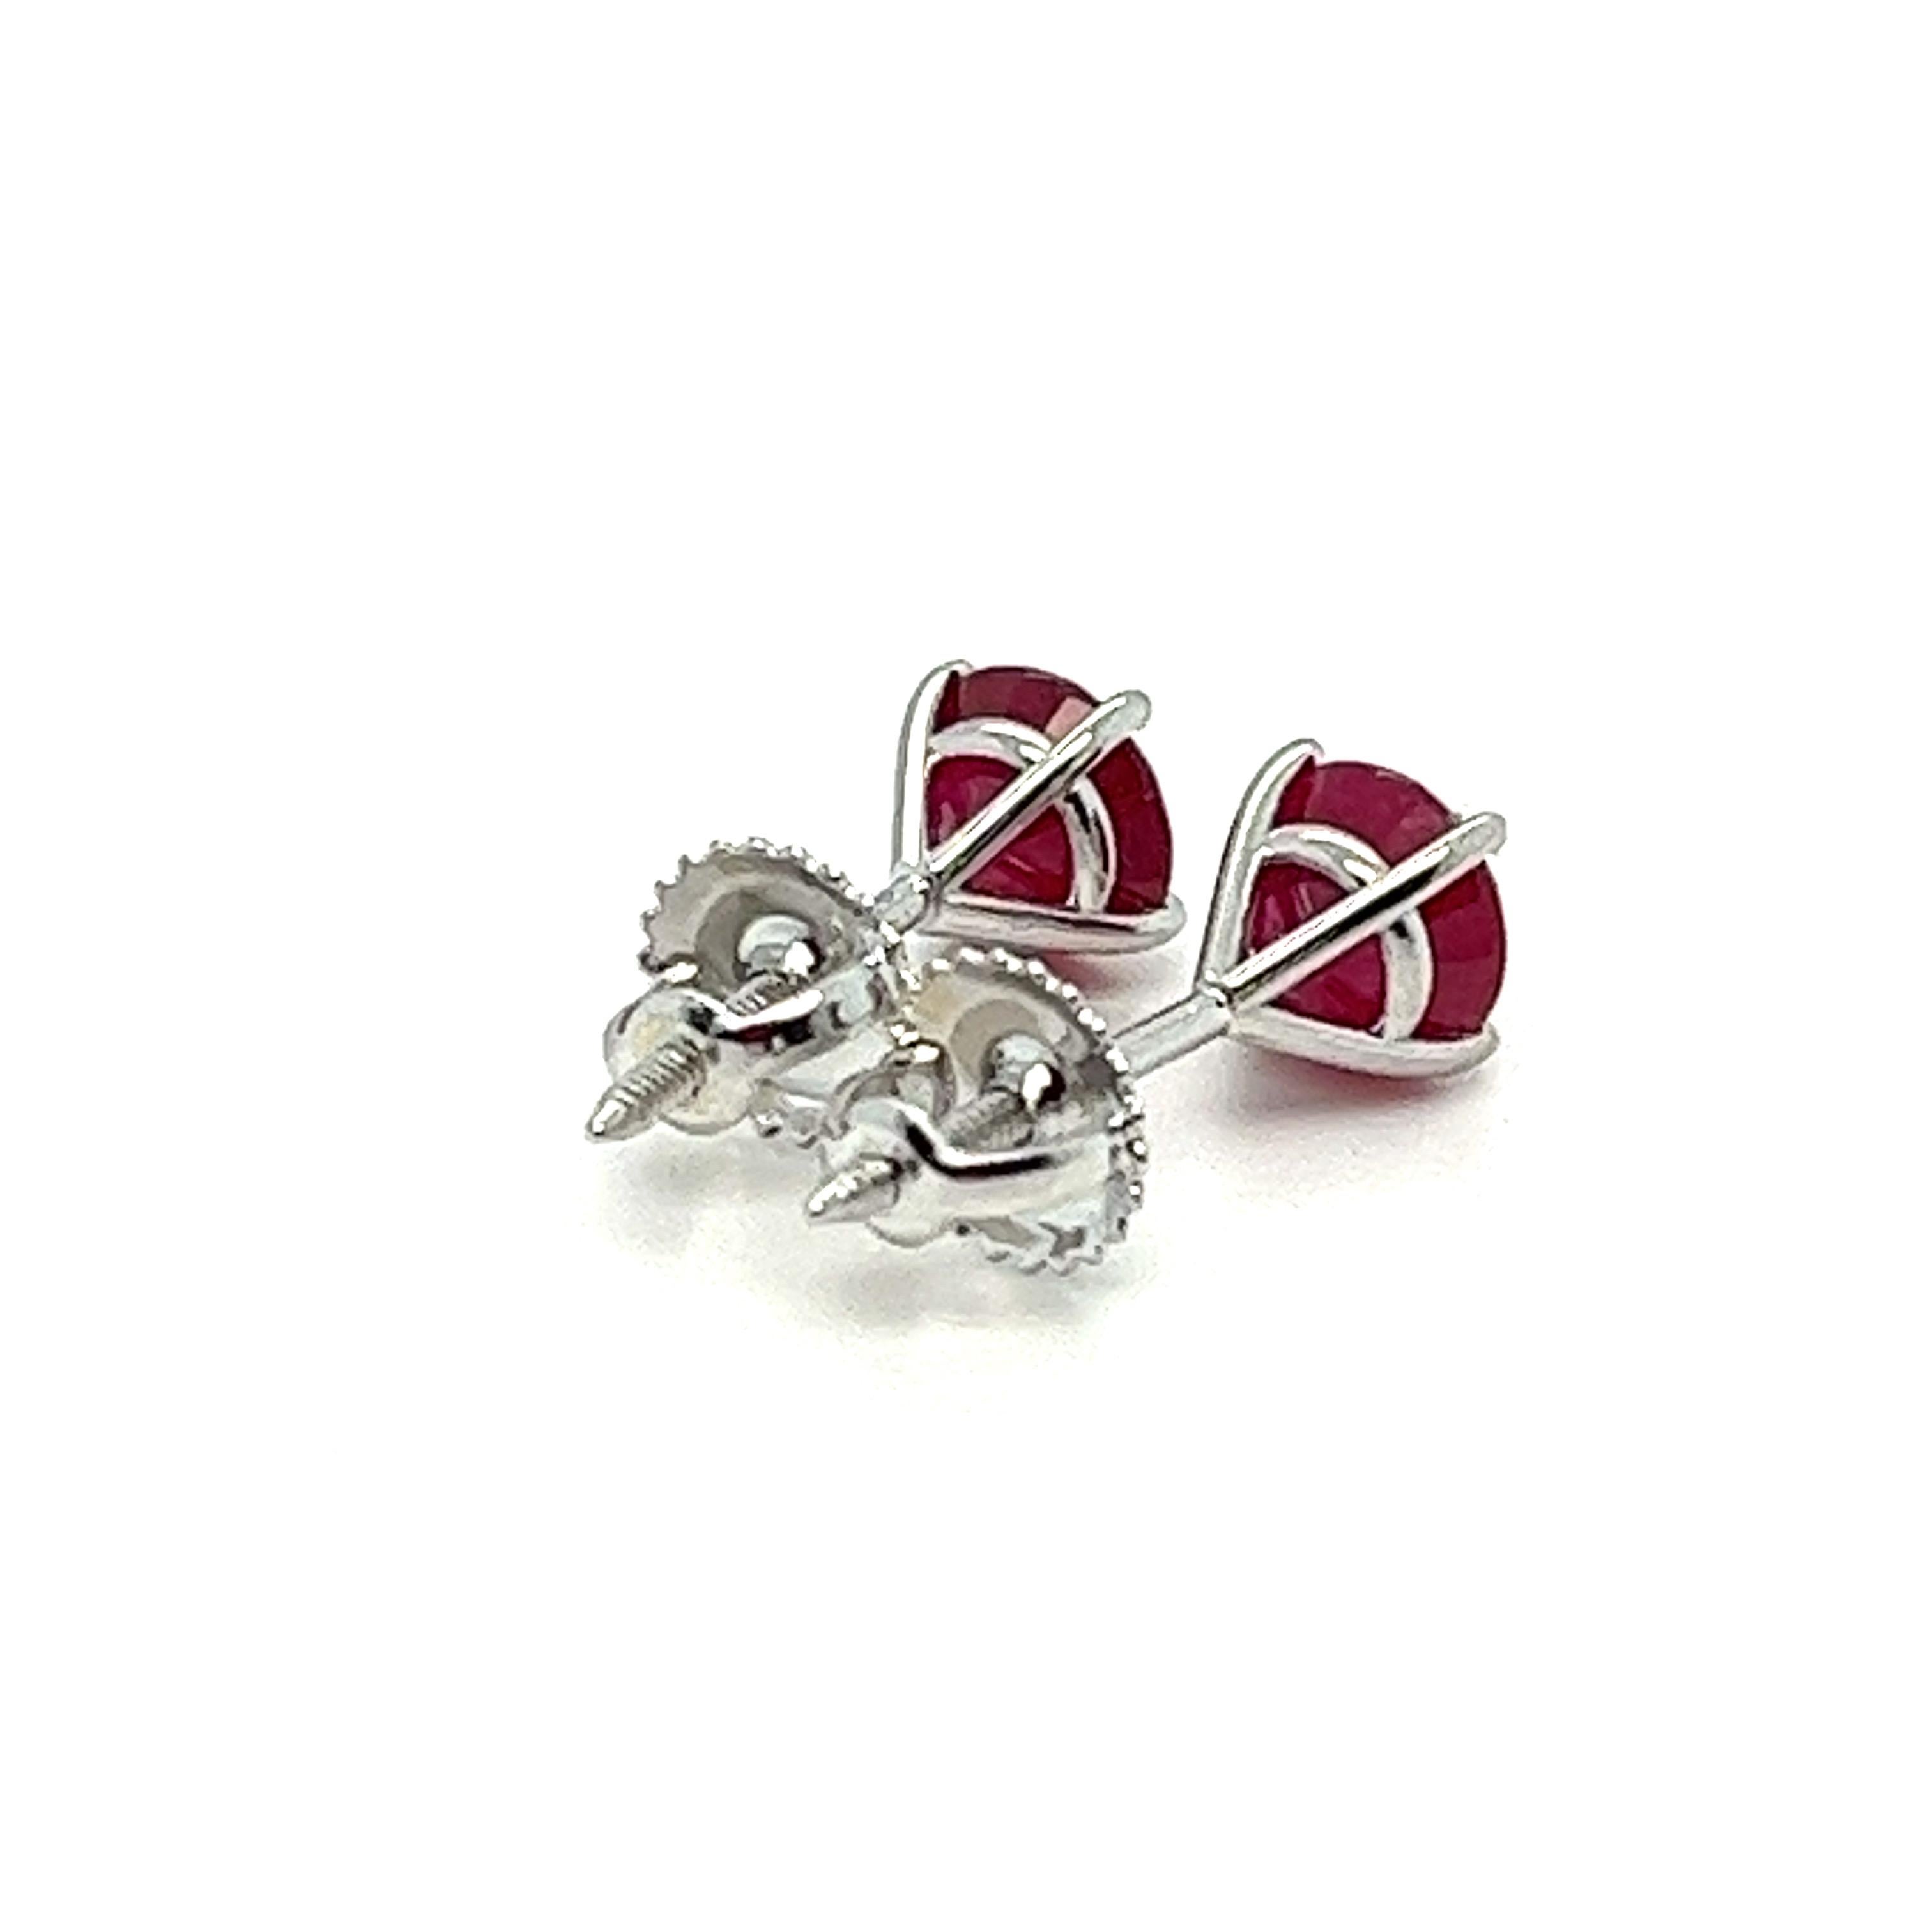 Women's or Men's 2 Carats Natural Ruby Stud Earring in 14K White Gold, Screw-Backs. For Sale